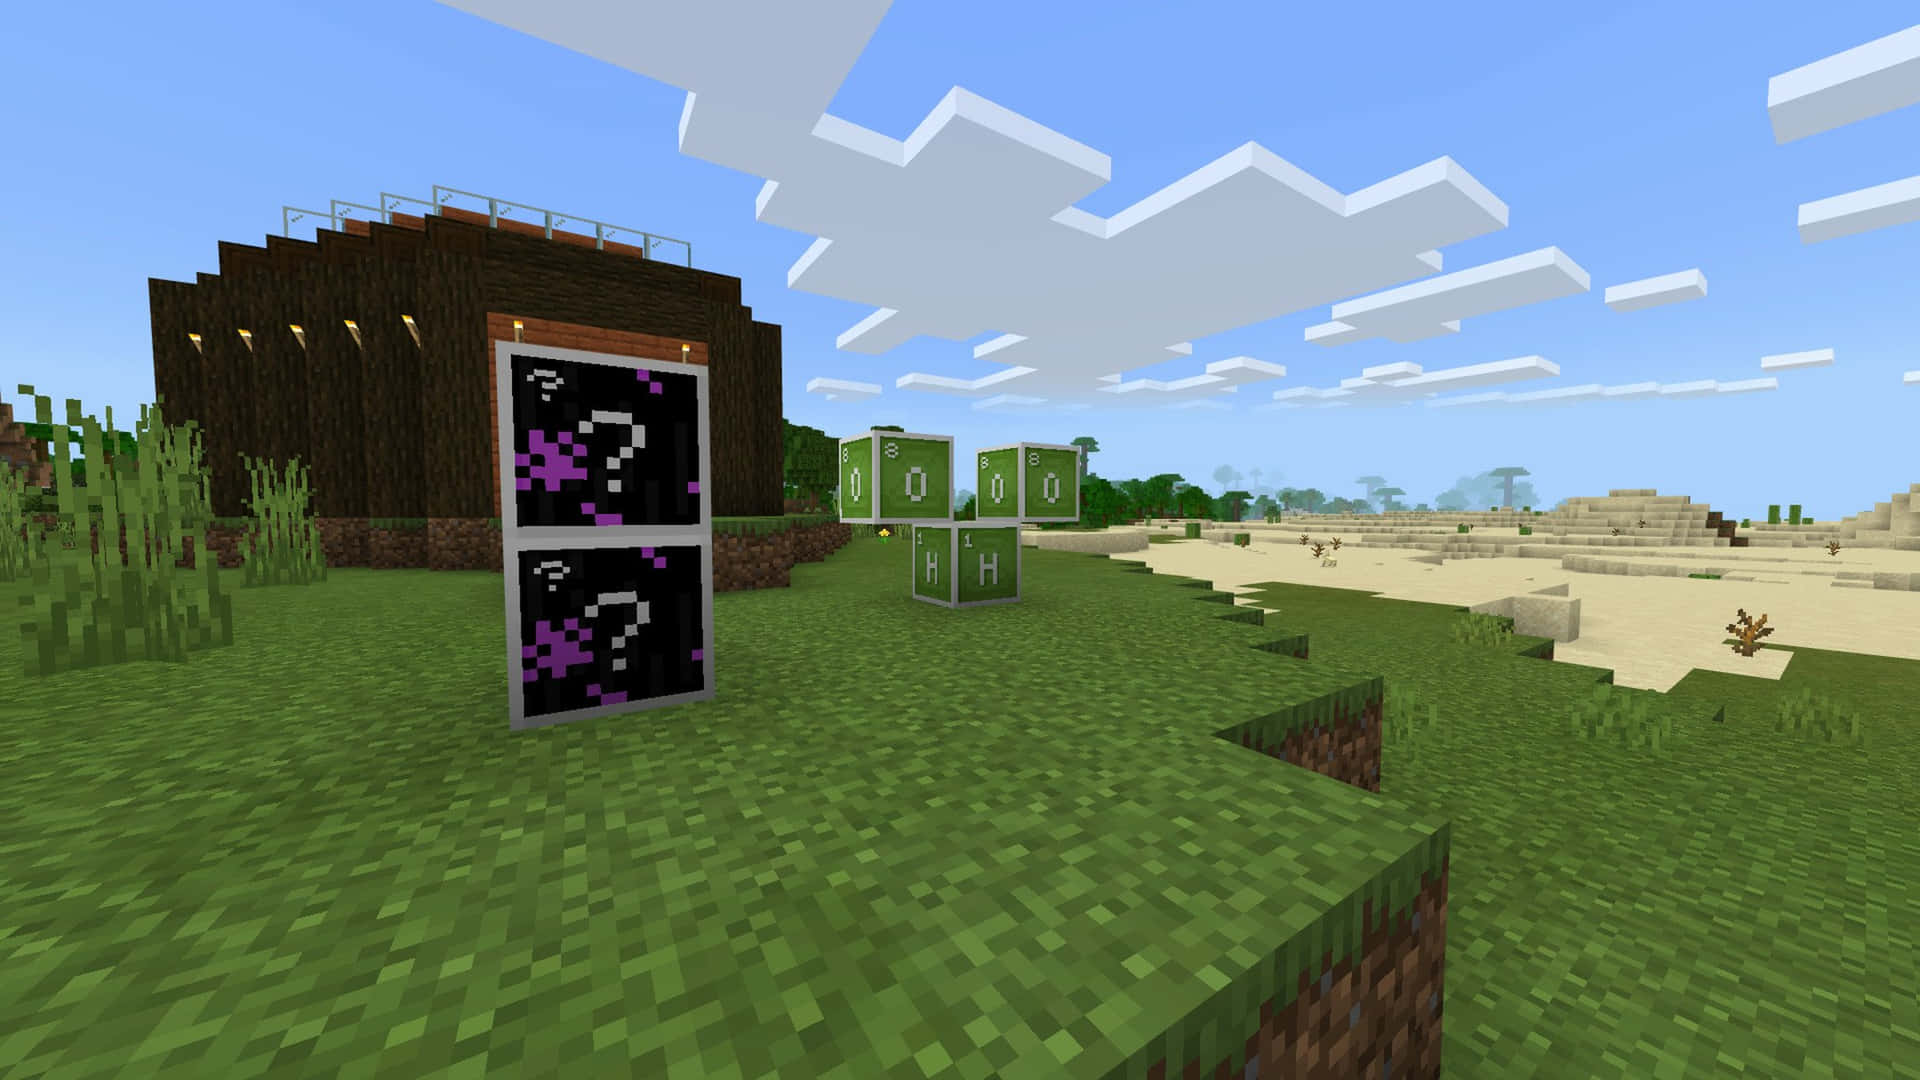 Students explore a virtual world in Minecraft Education Edition Wallpaper